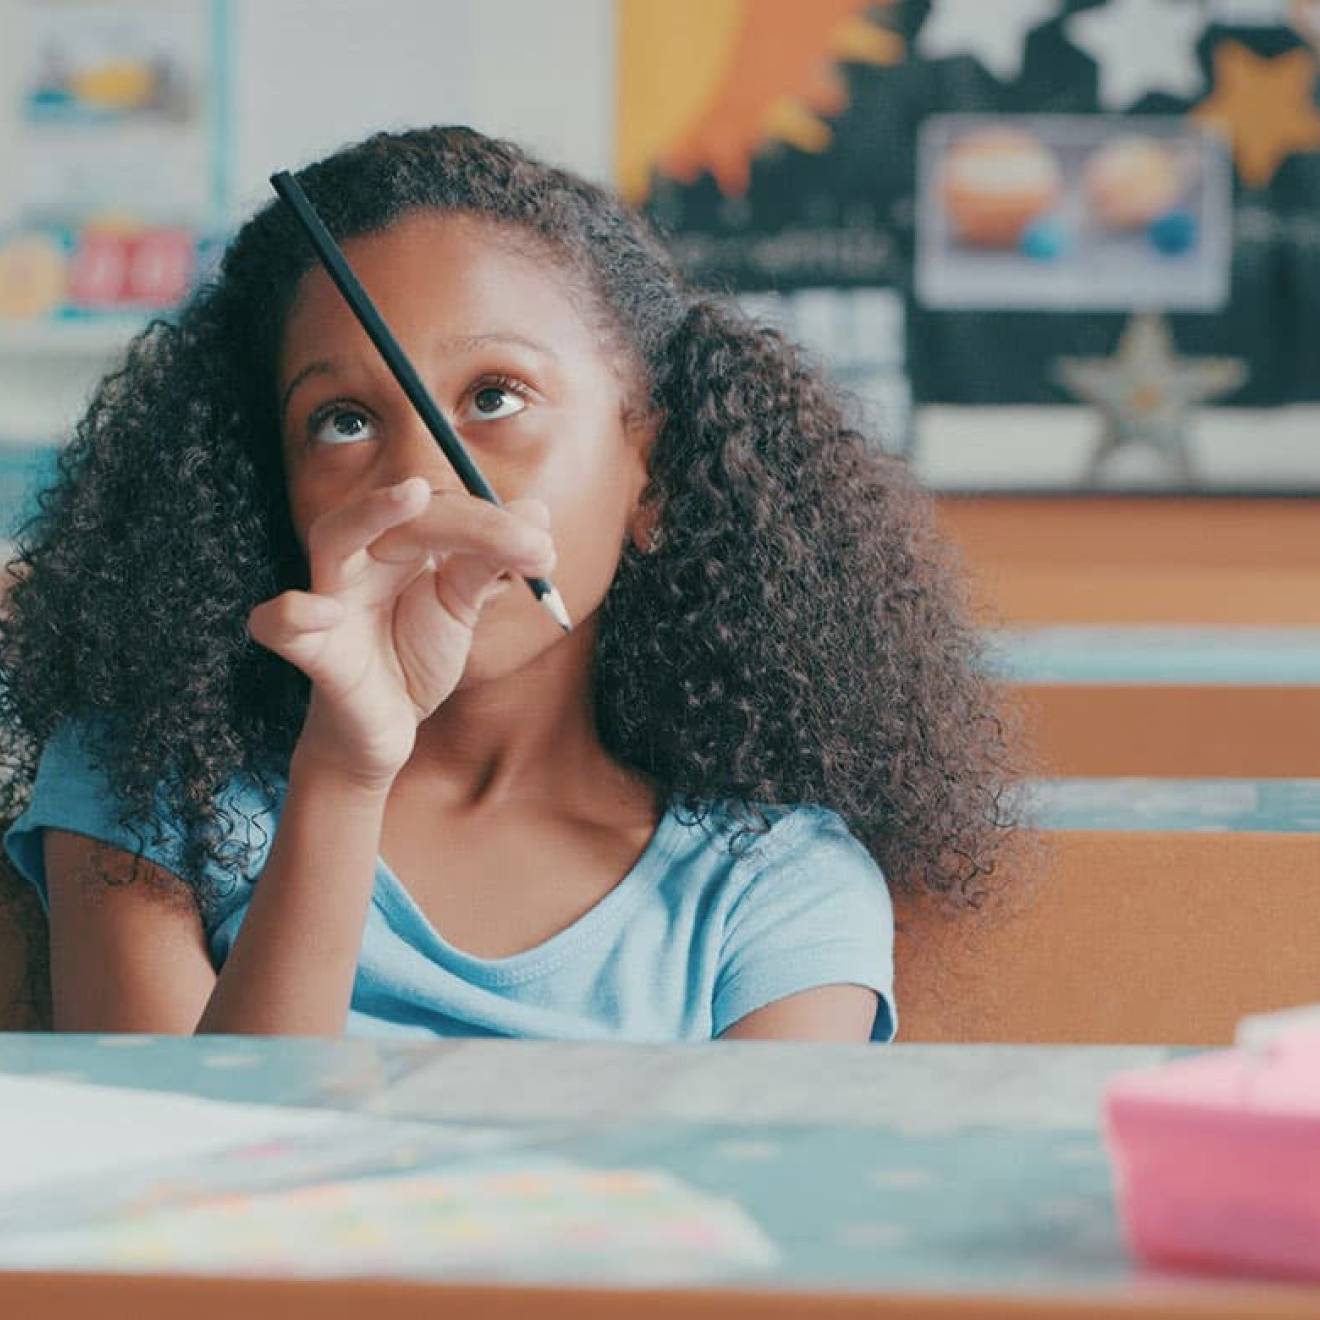 Young Black girl in classroom playing with her pencil, bored